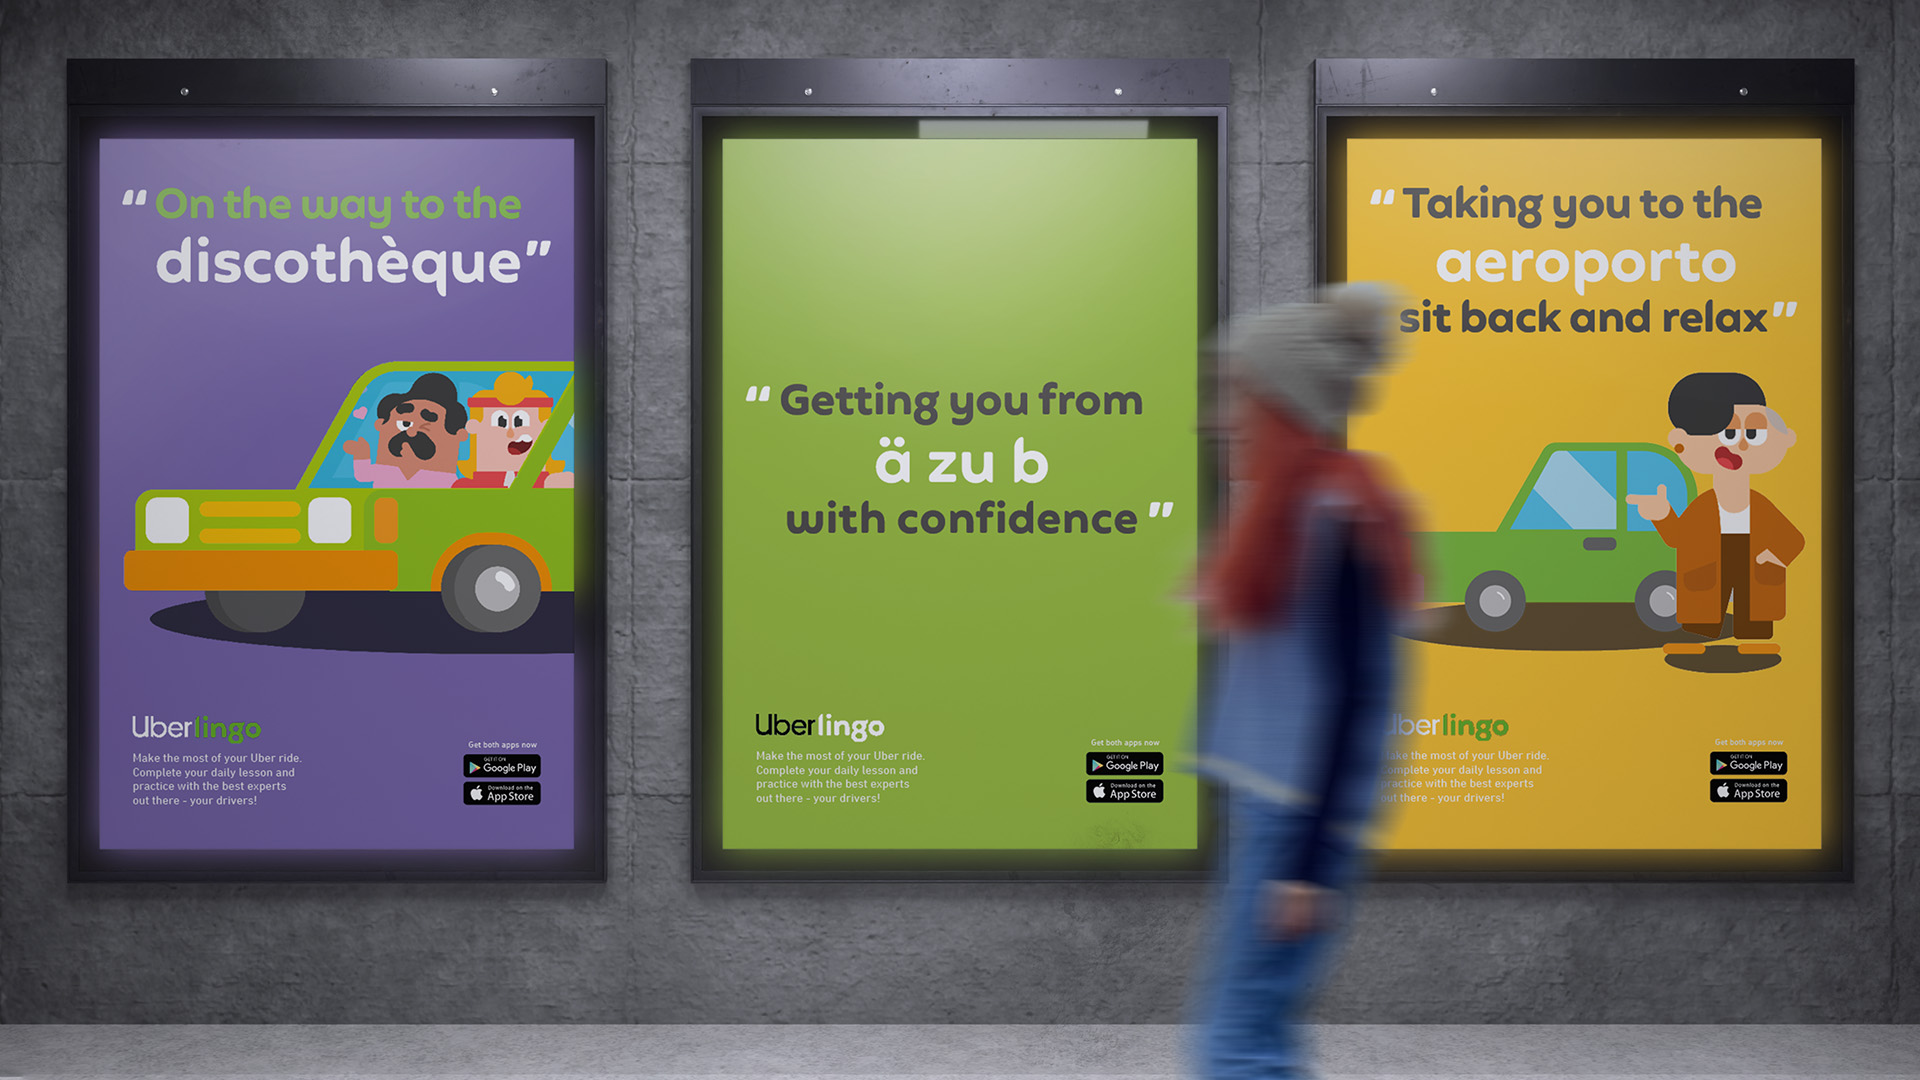 D&AD New Blood Duolingo competition entry group work, showing a fun engaging social media campaign between Duolingo and Uber.